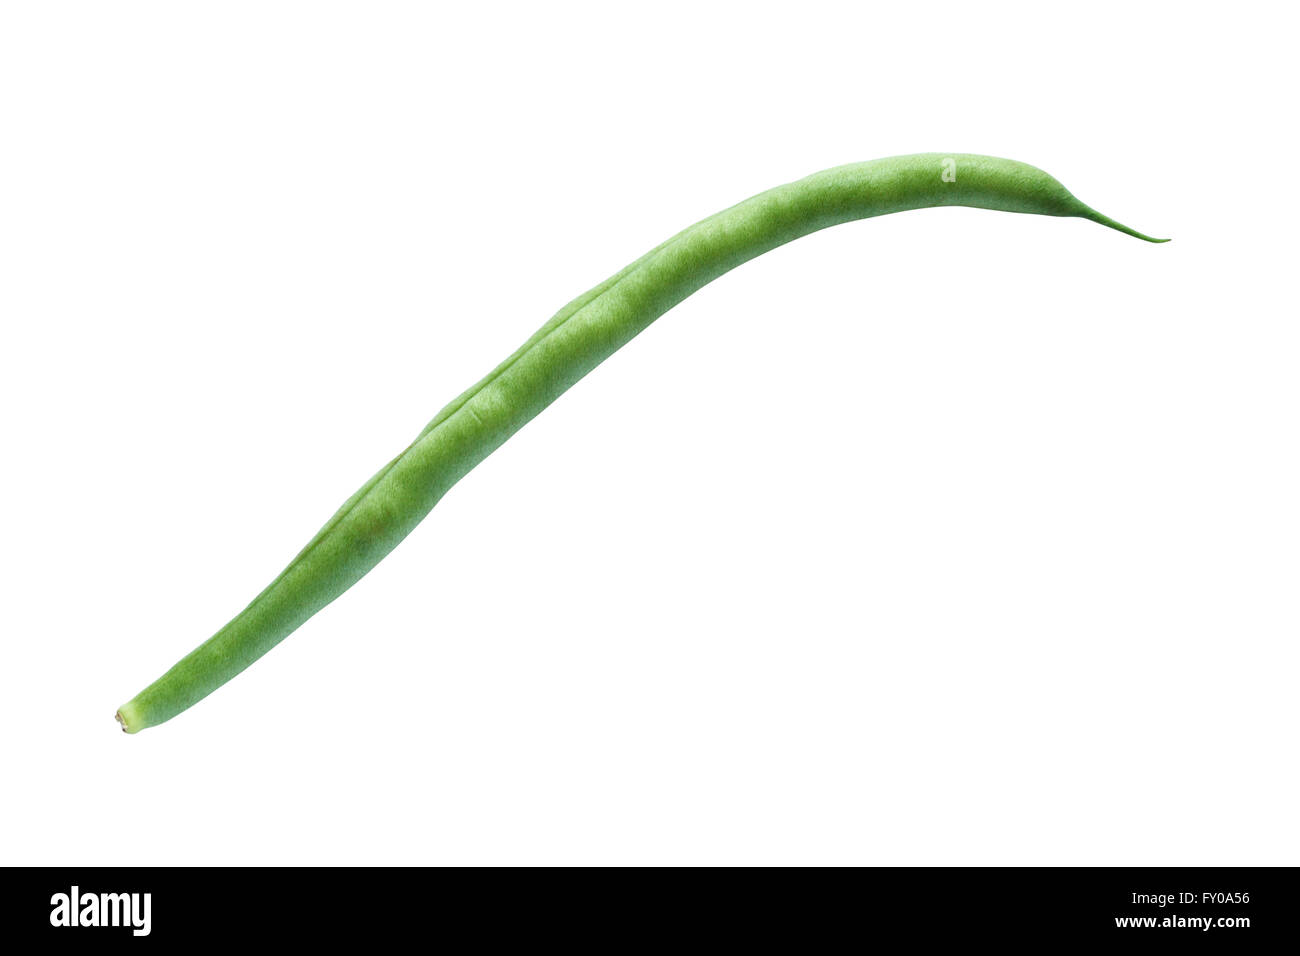 One freshness green beanstalk on white background. Isolated with clipping path Stock Photo